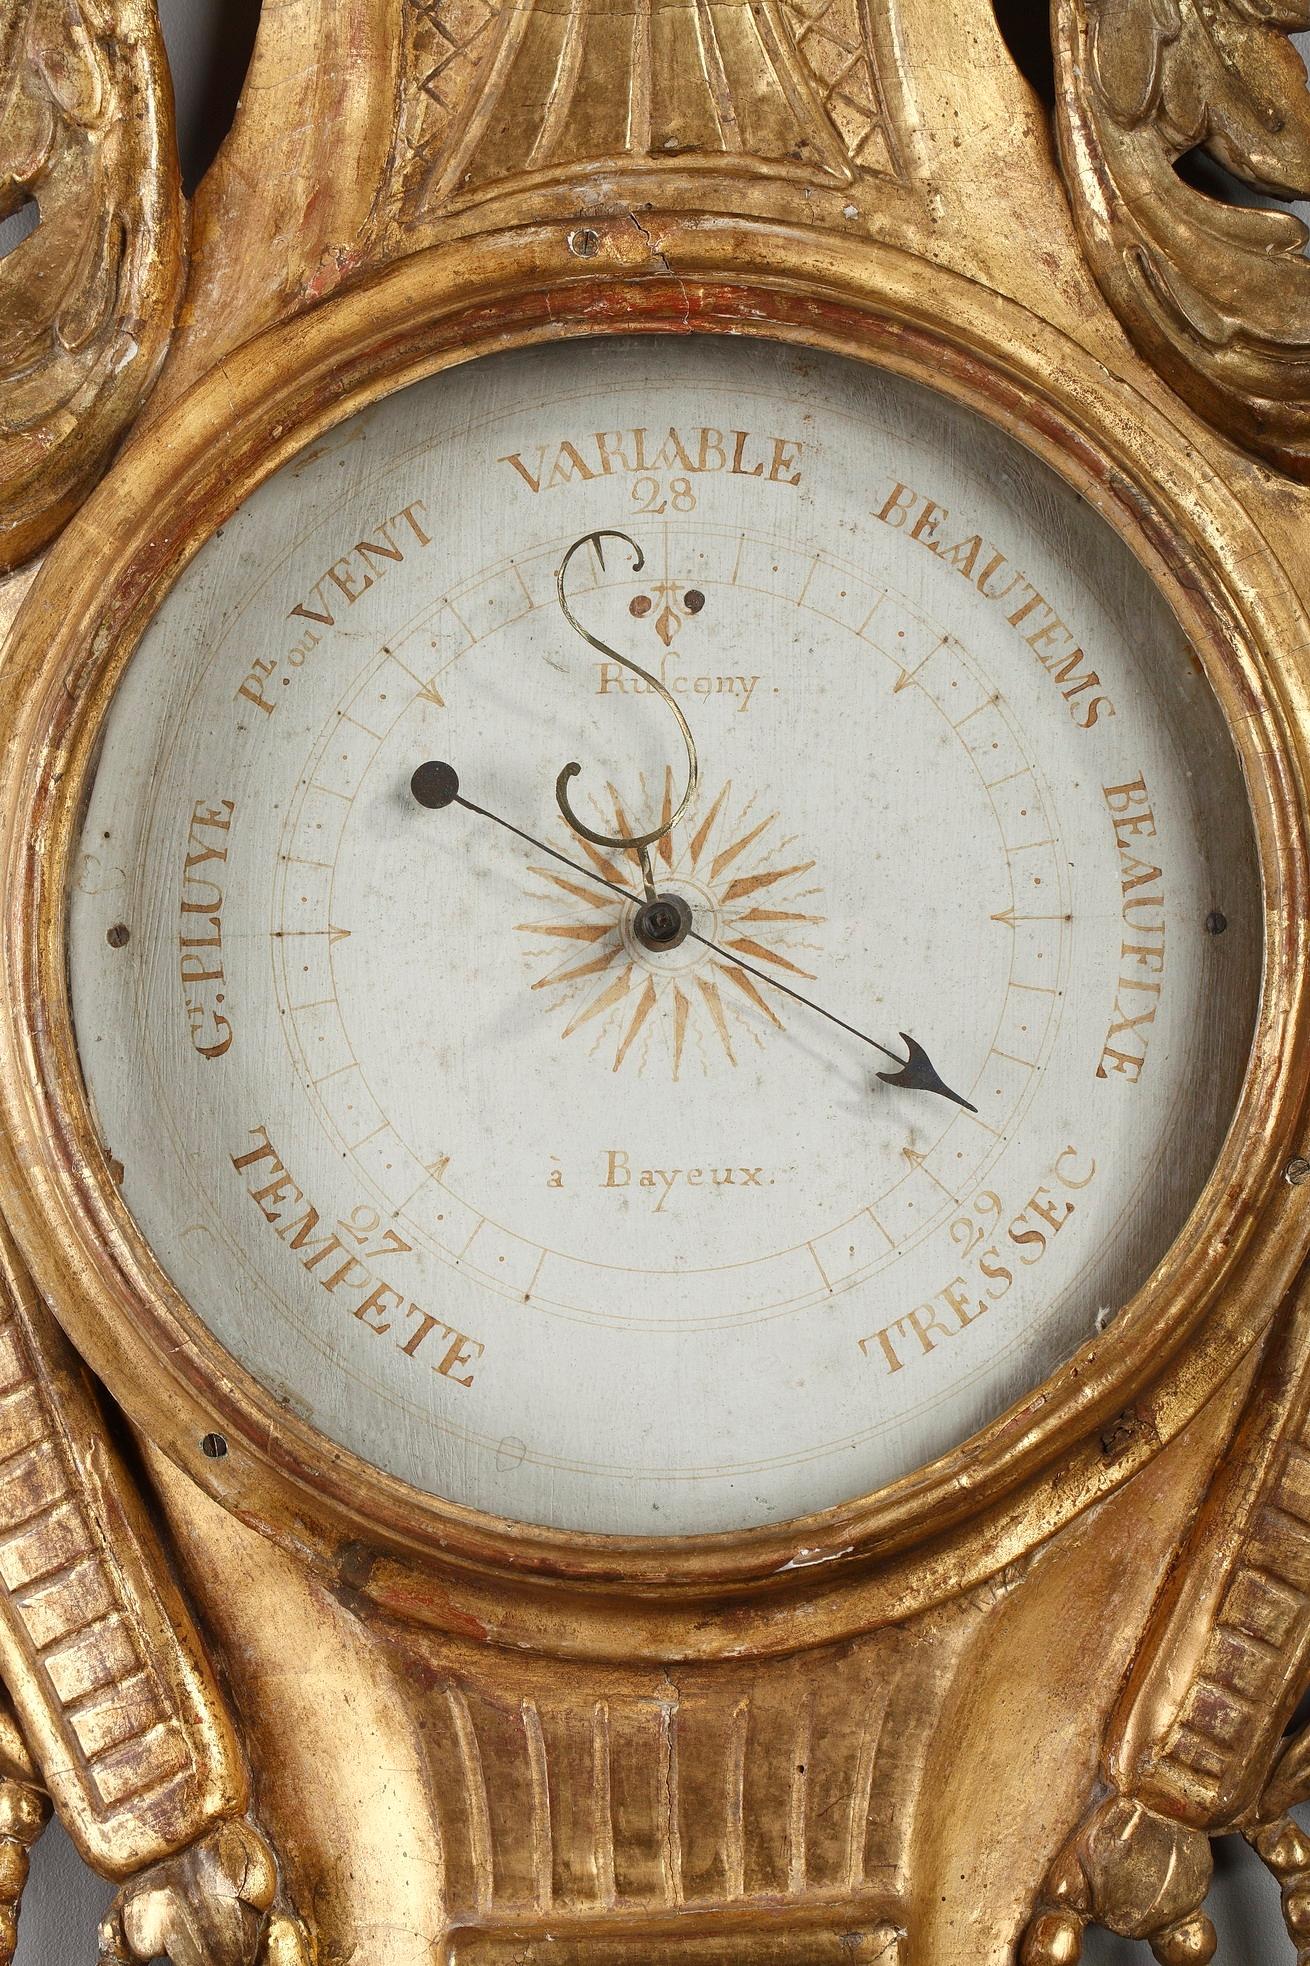 Late 18th century Louis XVI-period barometer and thermometer. The giltwood case is accentuated by flowery basket, laurel leaves and foliated scrolls. The dial marked with ink on paper, allows reading of current barometric pressure. It is flanked by